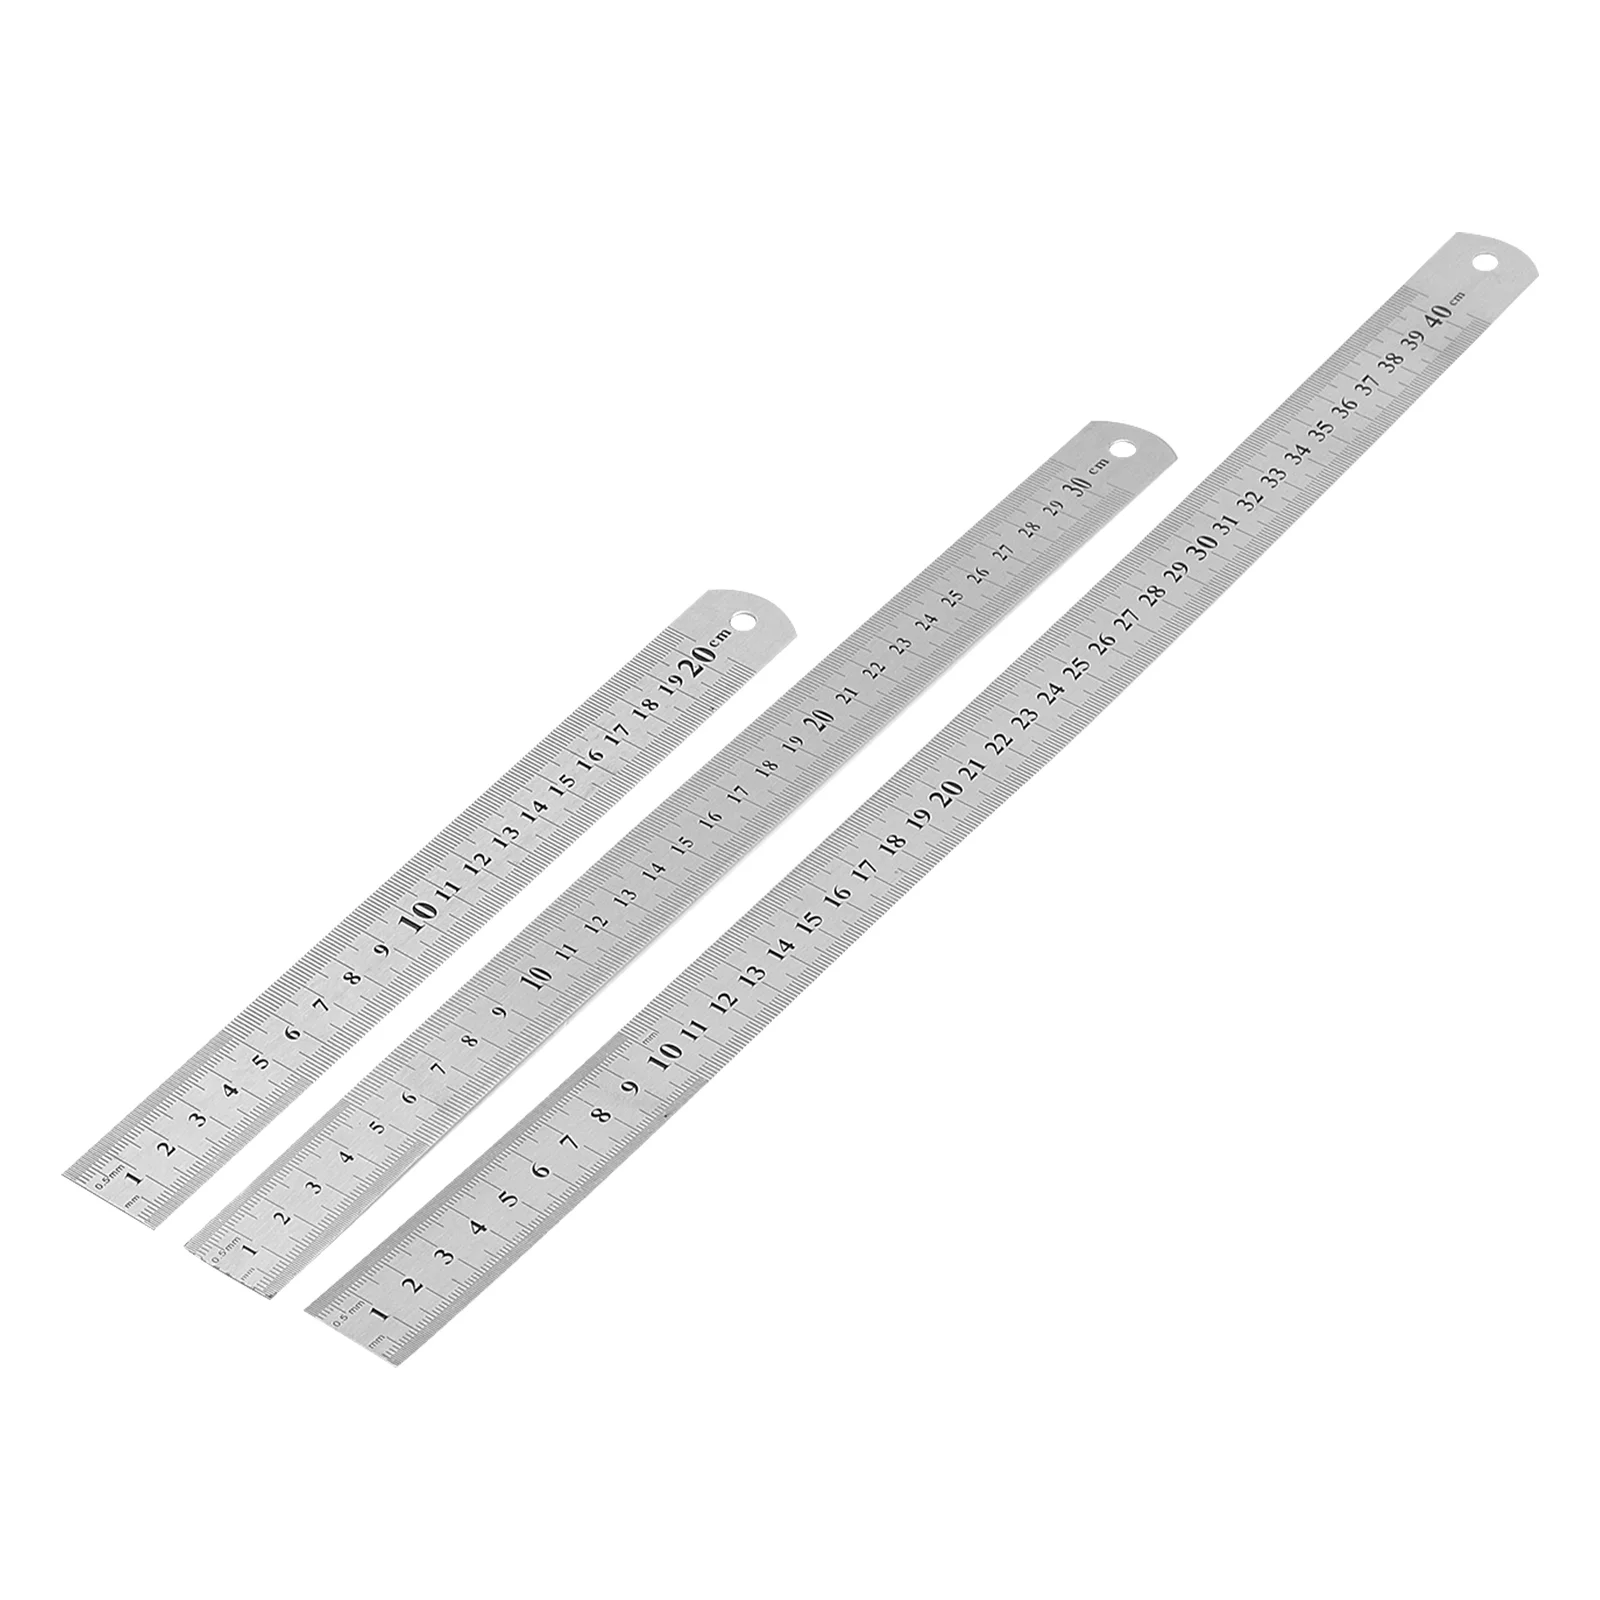 

Machinist Tools Metal Ruler Stainless Steel Rulers Engineering Office Drawing Architectural Scale Office Supplies Set